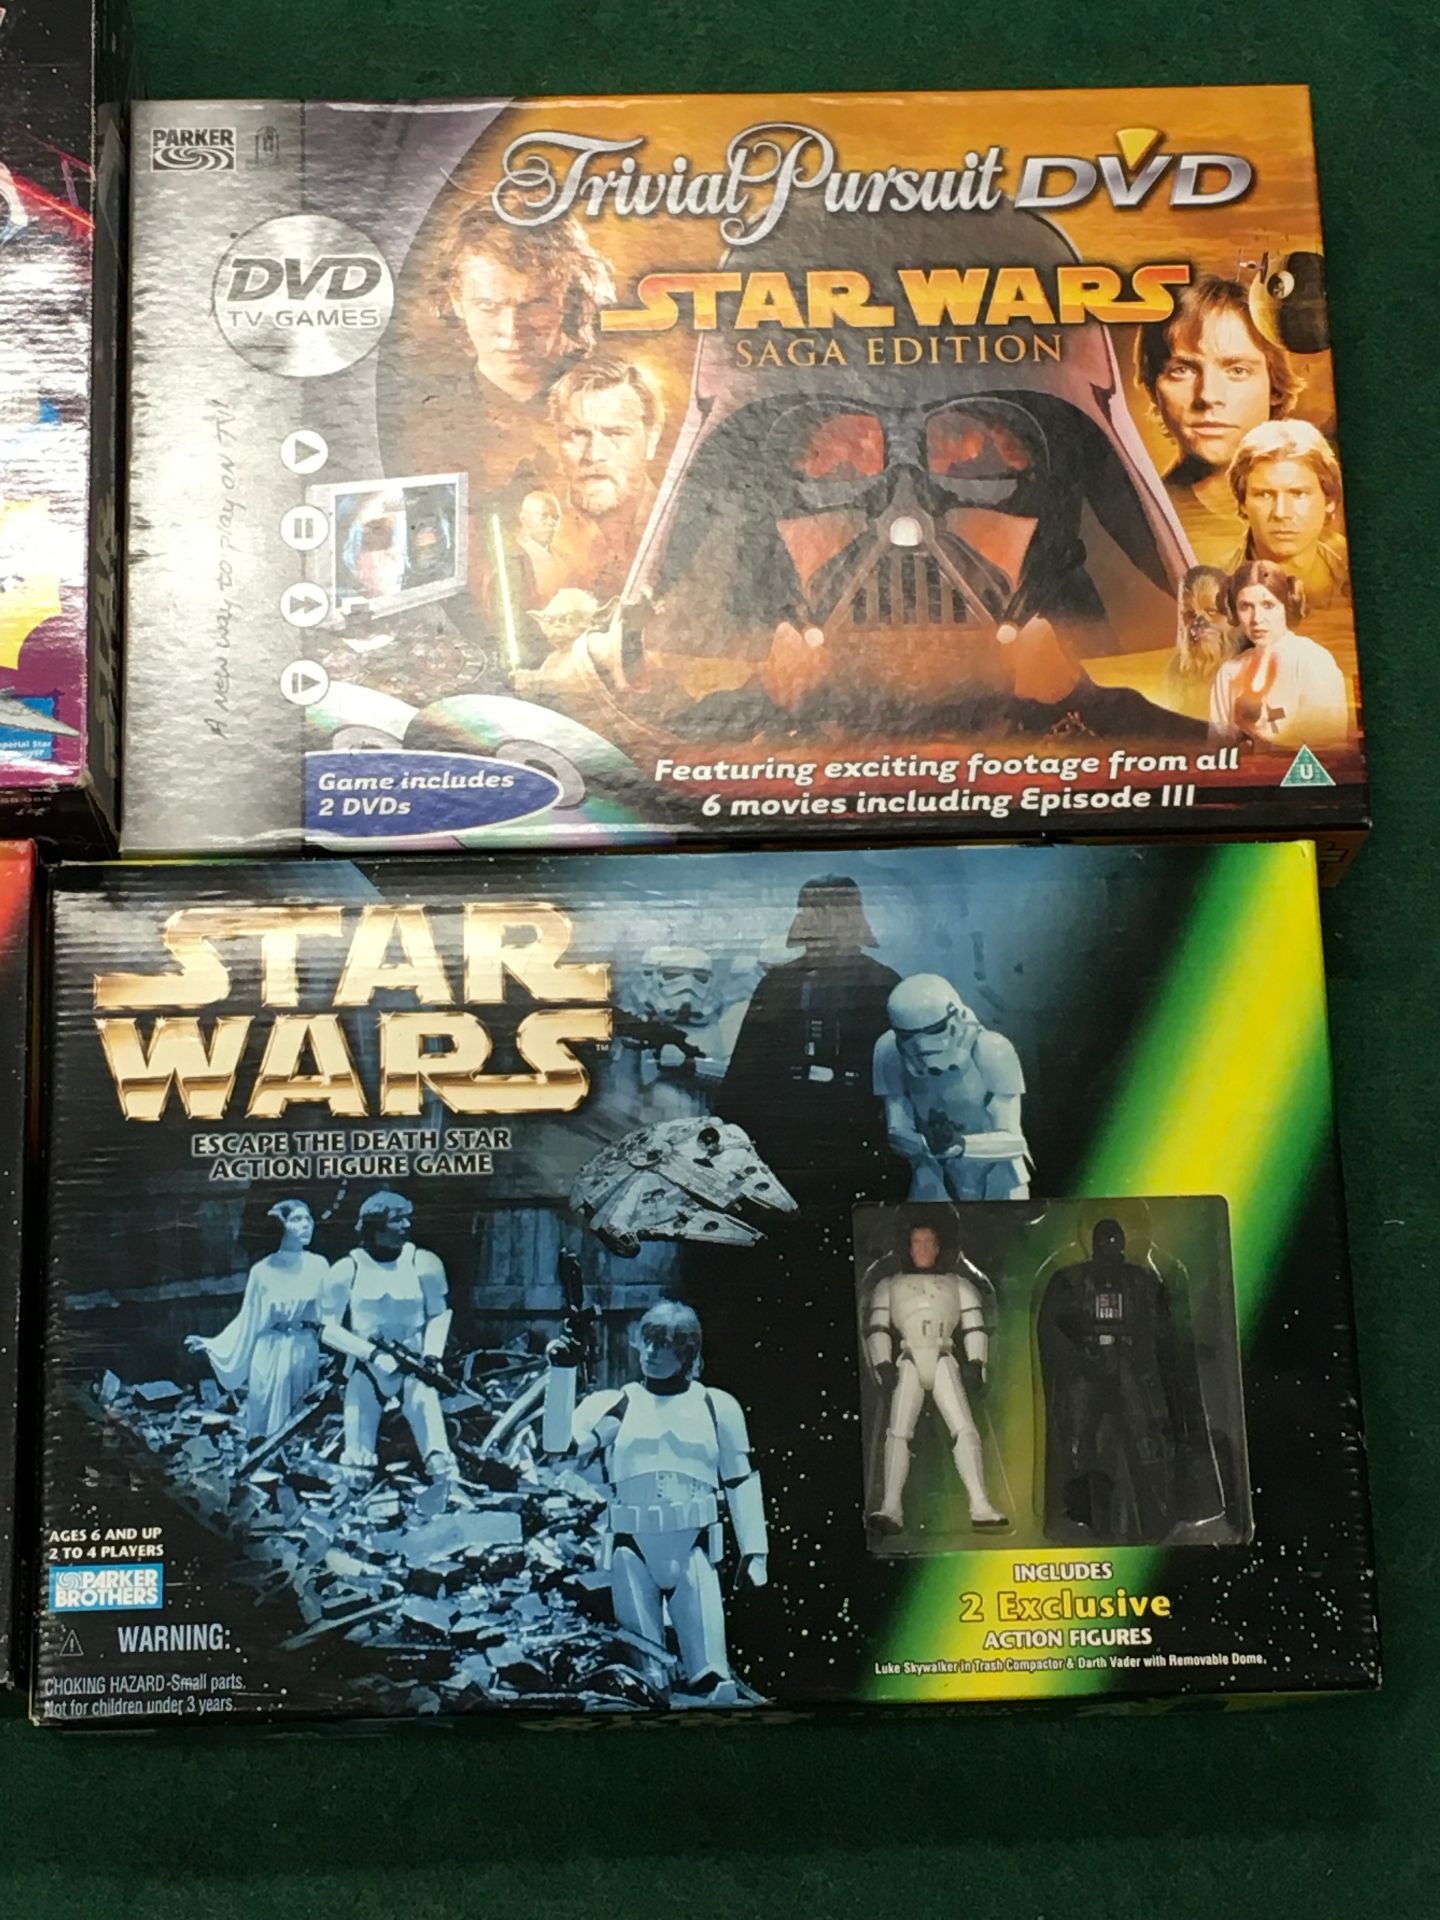 Star Wars games to include Electronic Galactic Battle, DVD Trivial Pursuit, Escape the Death Star - Image 3 of 7